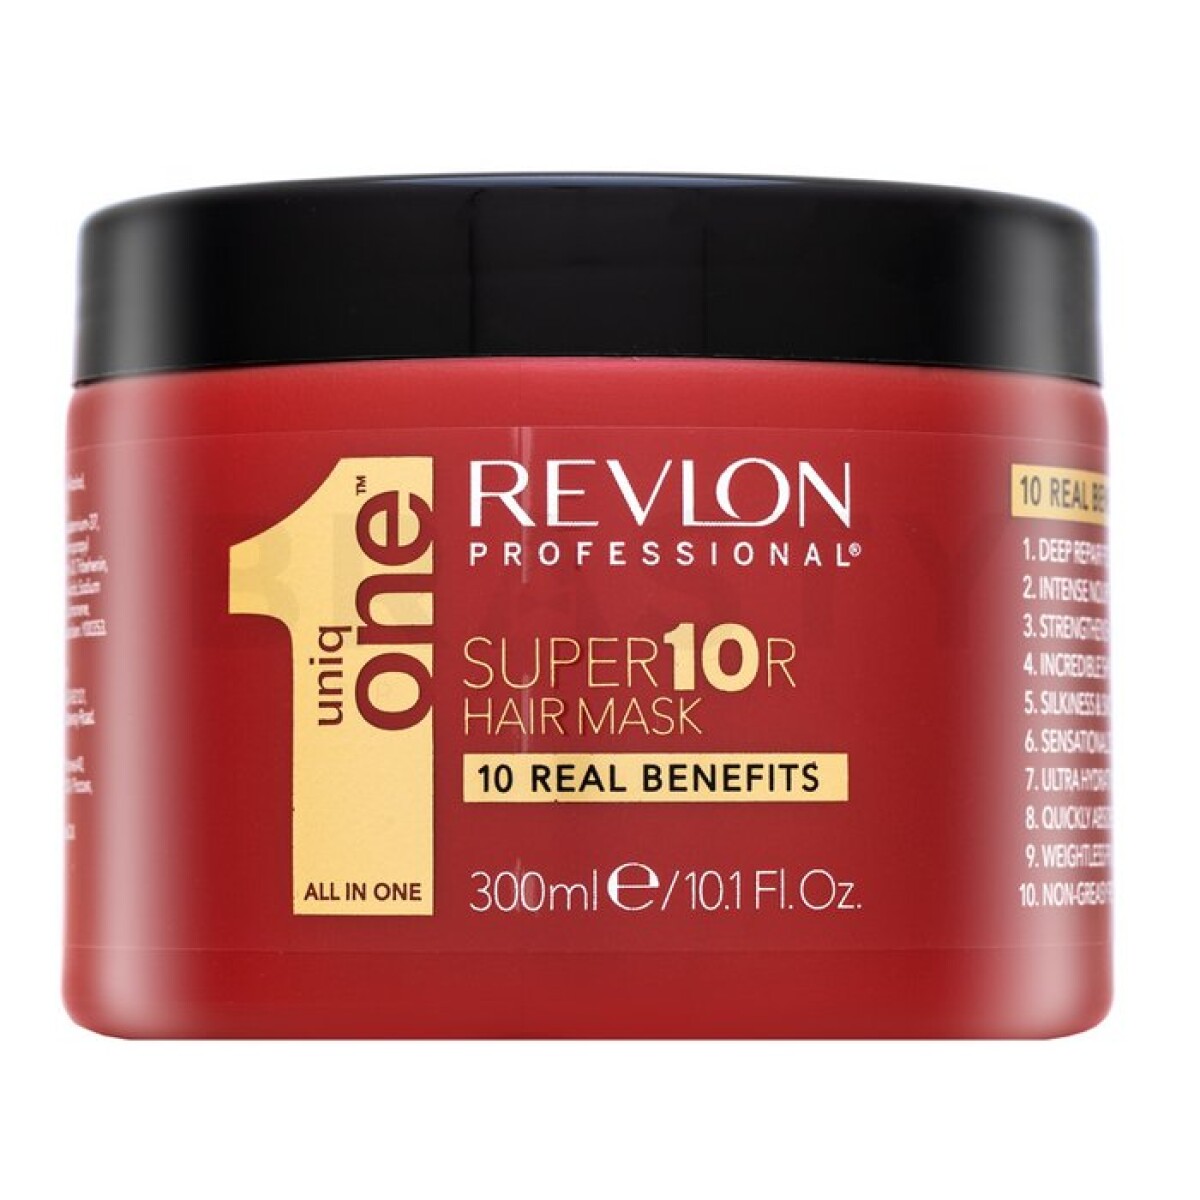 Revlon Professional All in One hair mask 300ml 